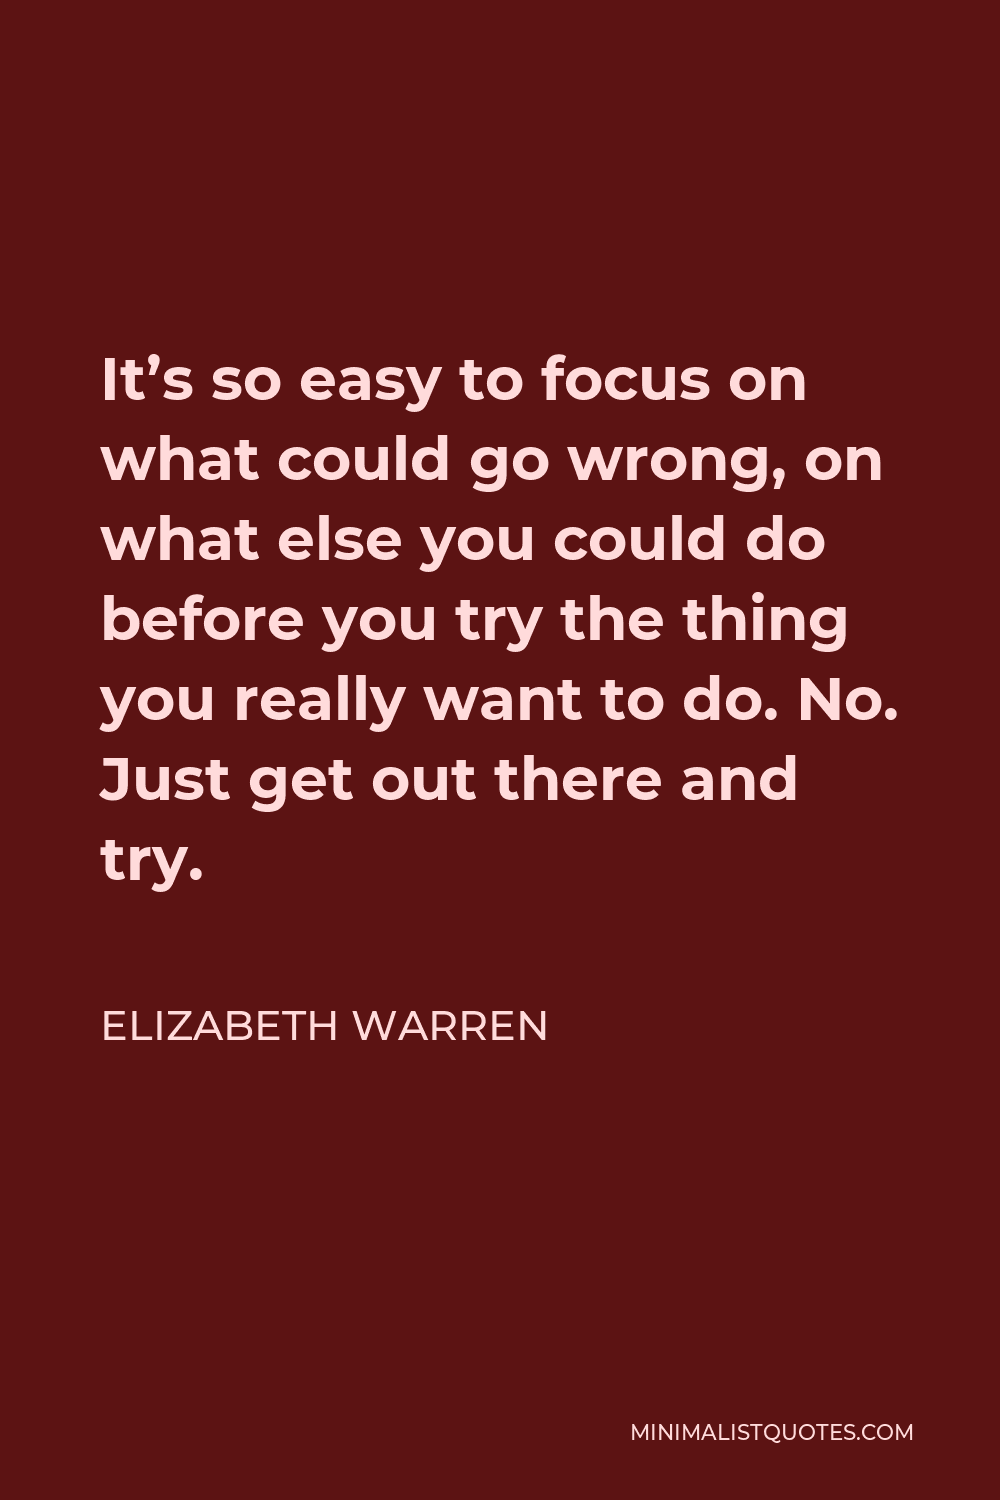 Elizabeth Warren Quote - It’s so easy to focus on what could go wrong, on what else you could do before you try the thing you really want to do. No. Just get out there and try.